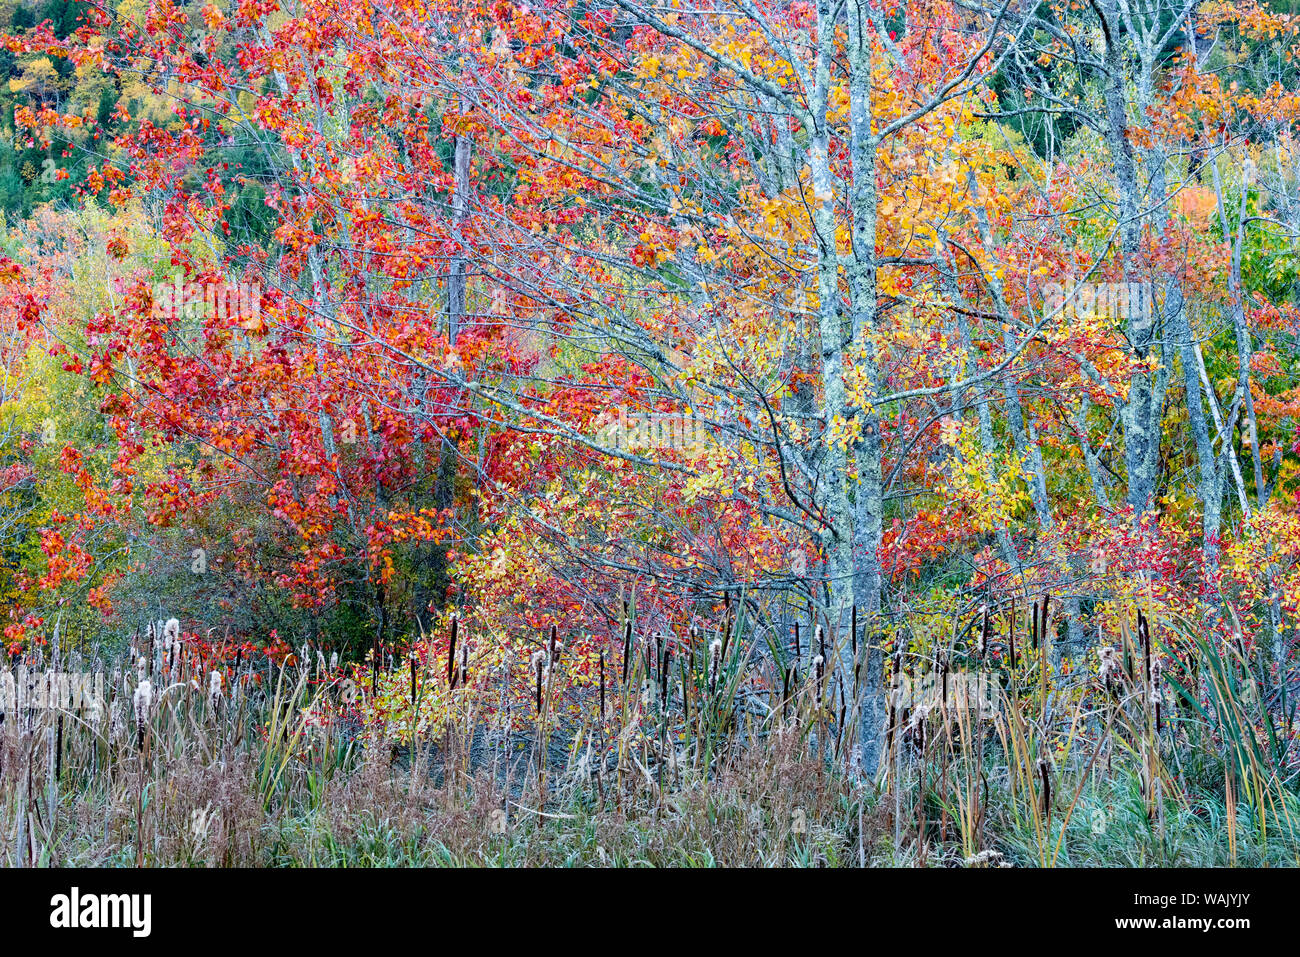 USA, Maine. Colorful autumn foliage in the forests of Sieur de Monts, Acadia National Park. Stock Photo